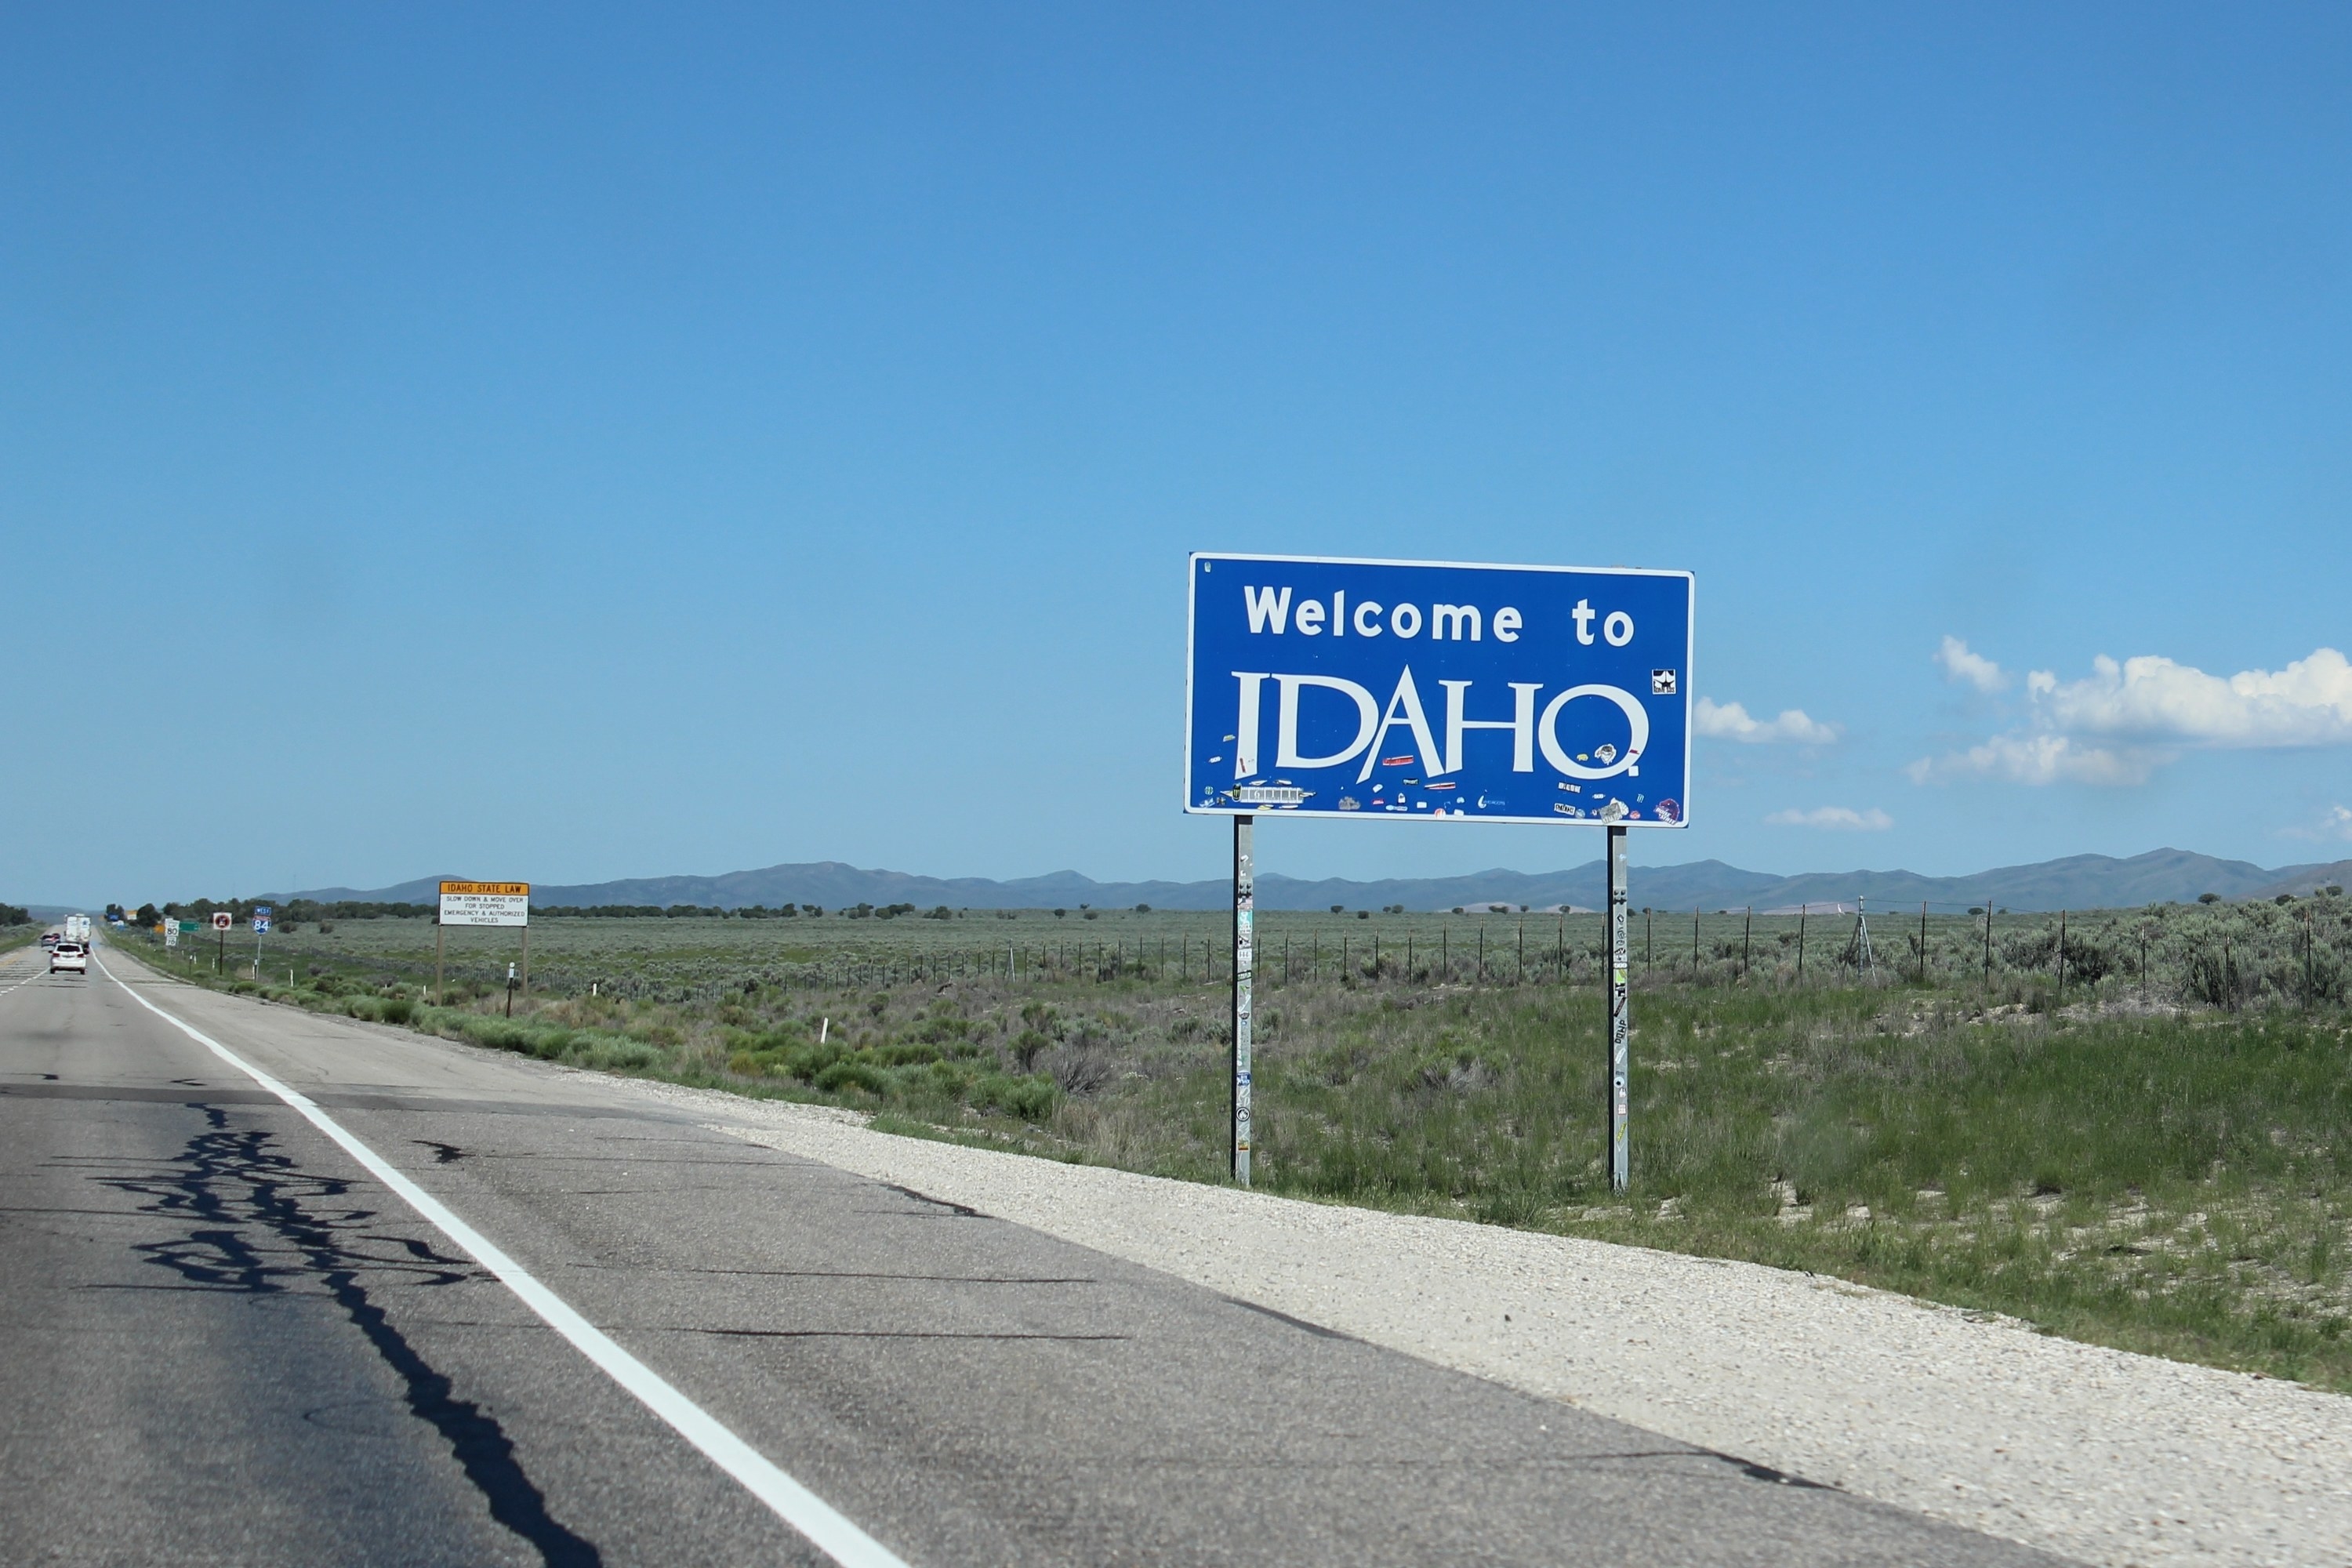 the Welcome to Idaho sign on the side of the highway